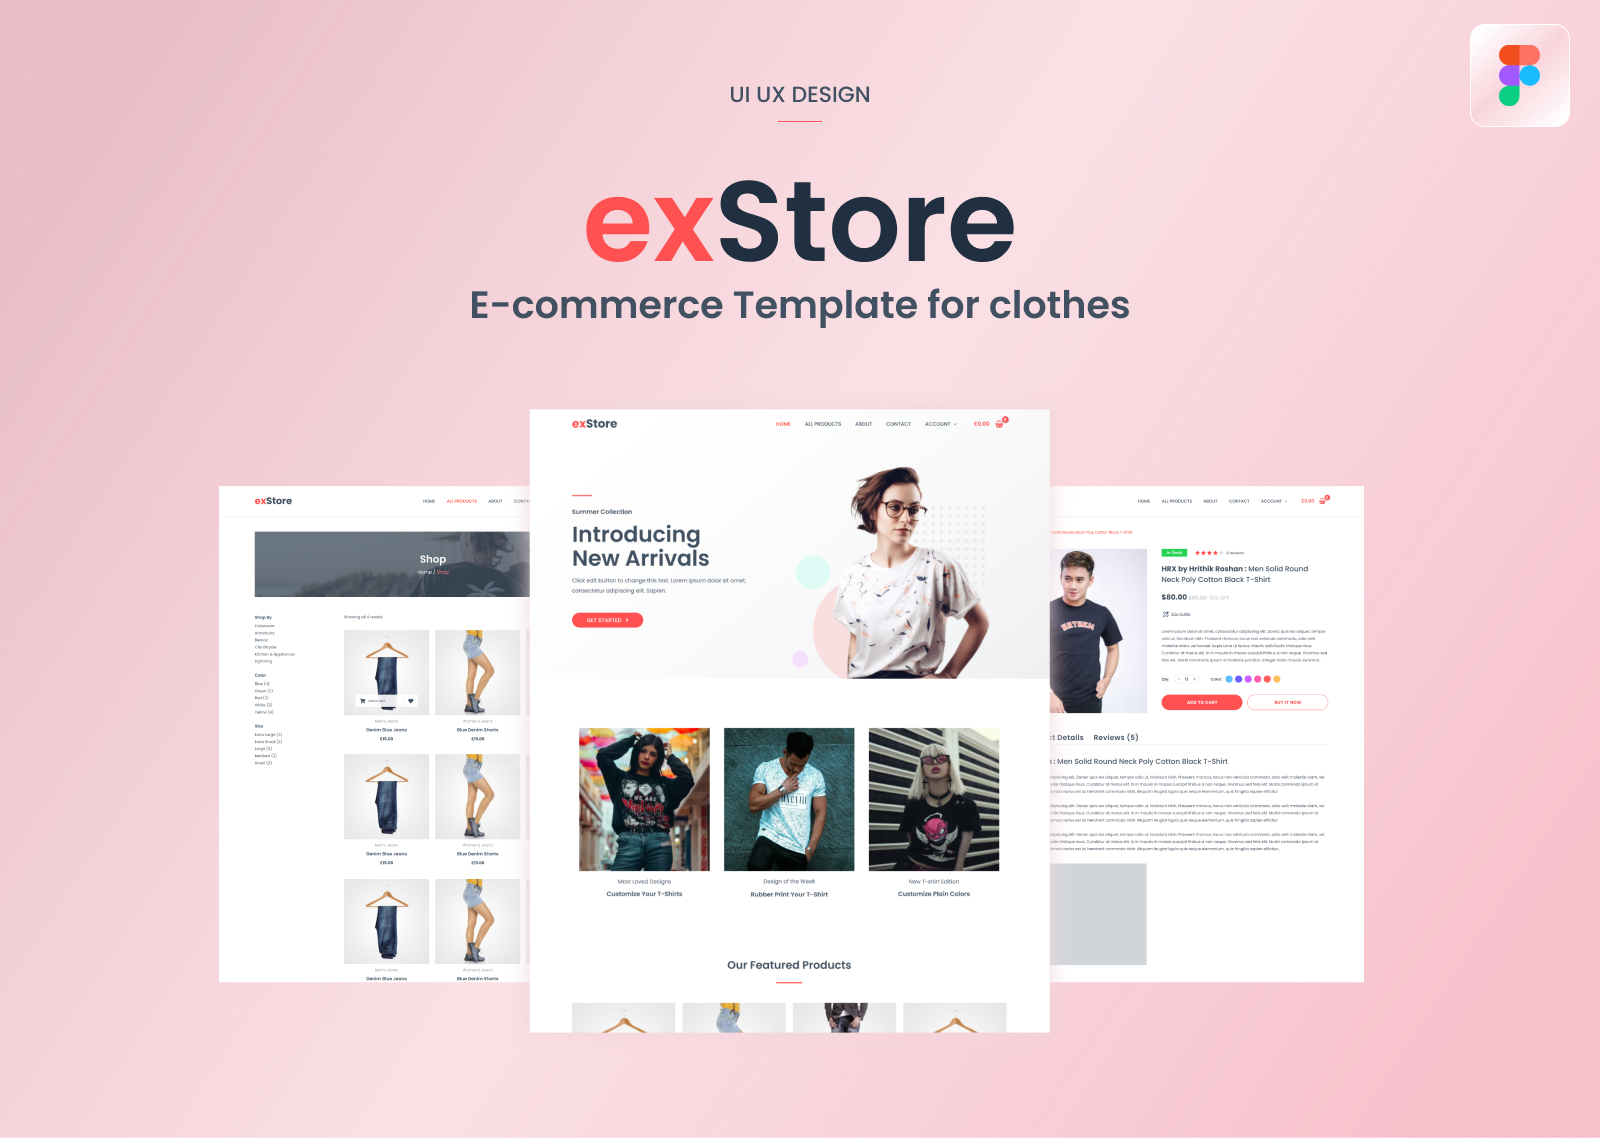 exstore-e-commerce-template-ux-ui-by-deepan-on-dribbble